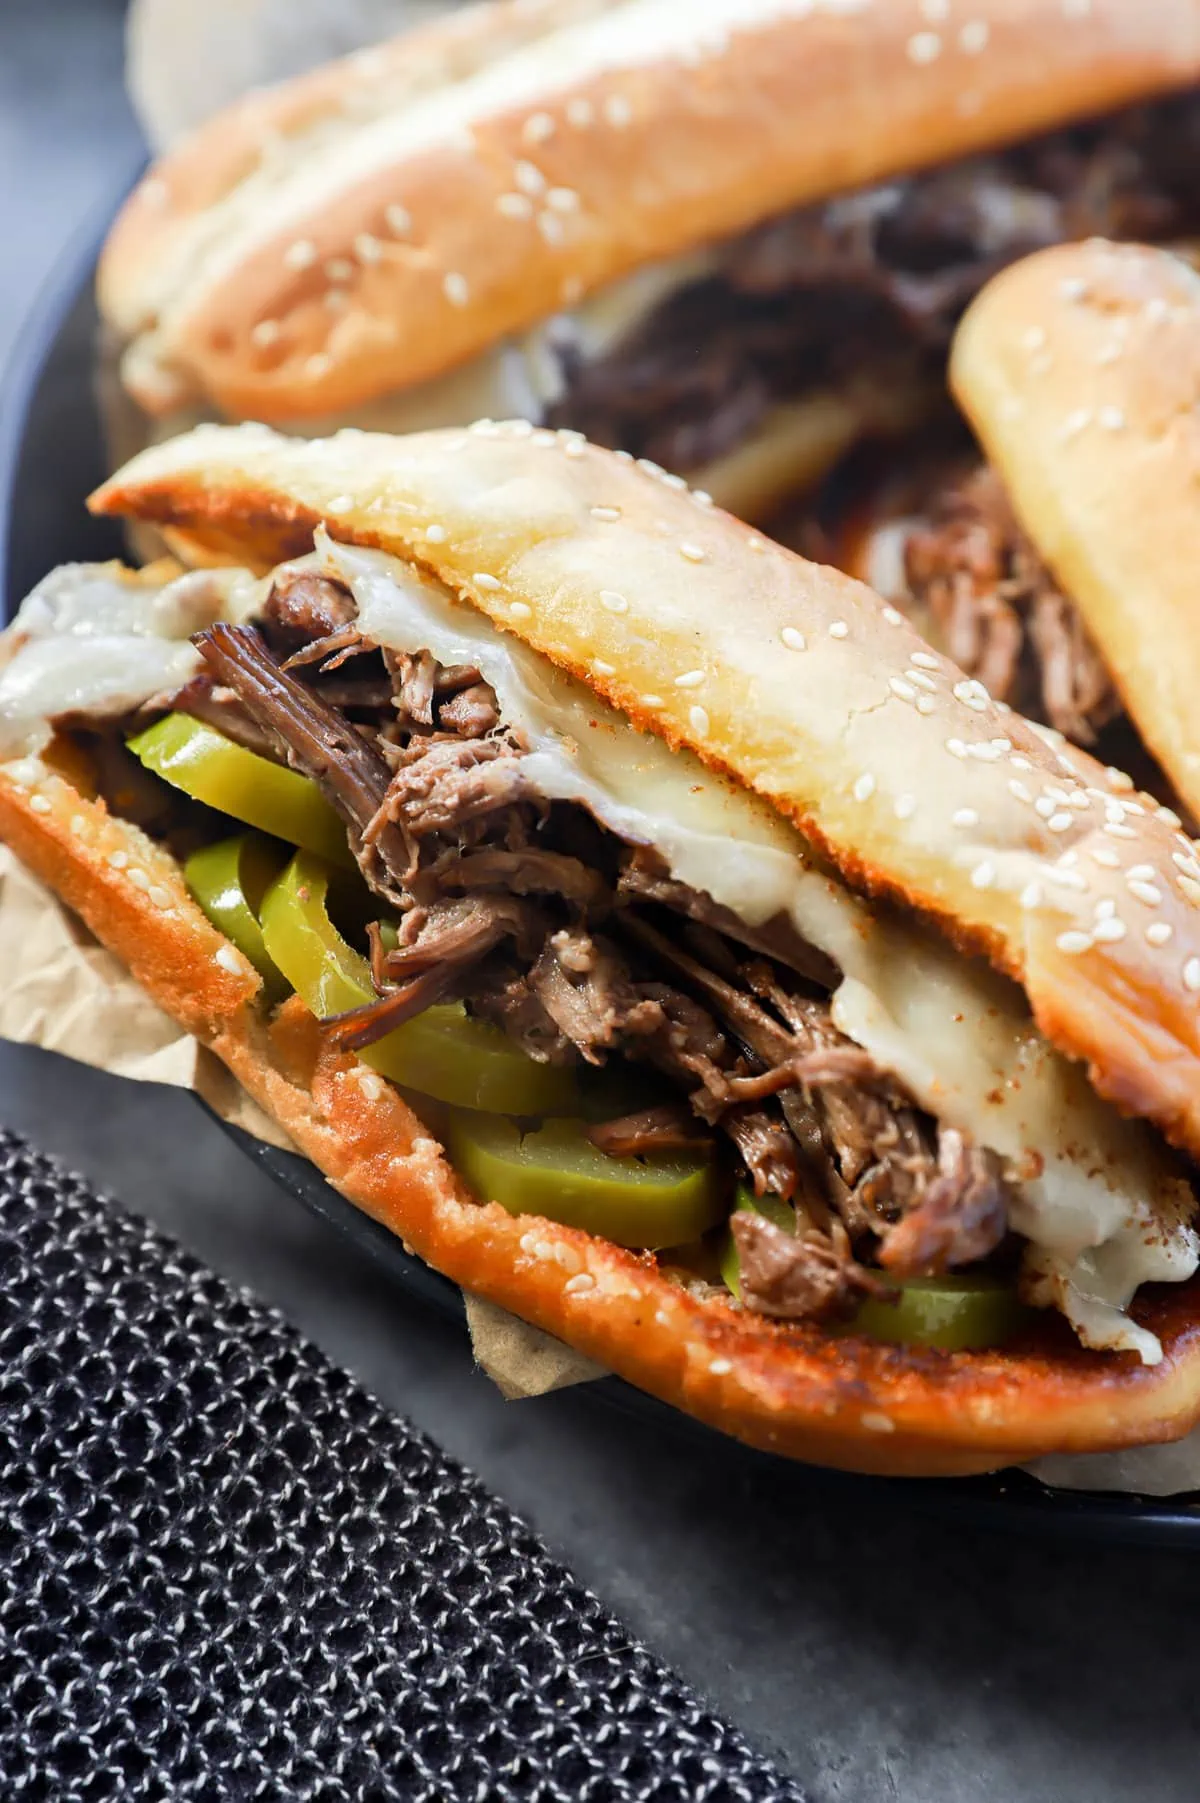 Image of a beef sandwich with hot peppers and cheese